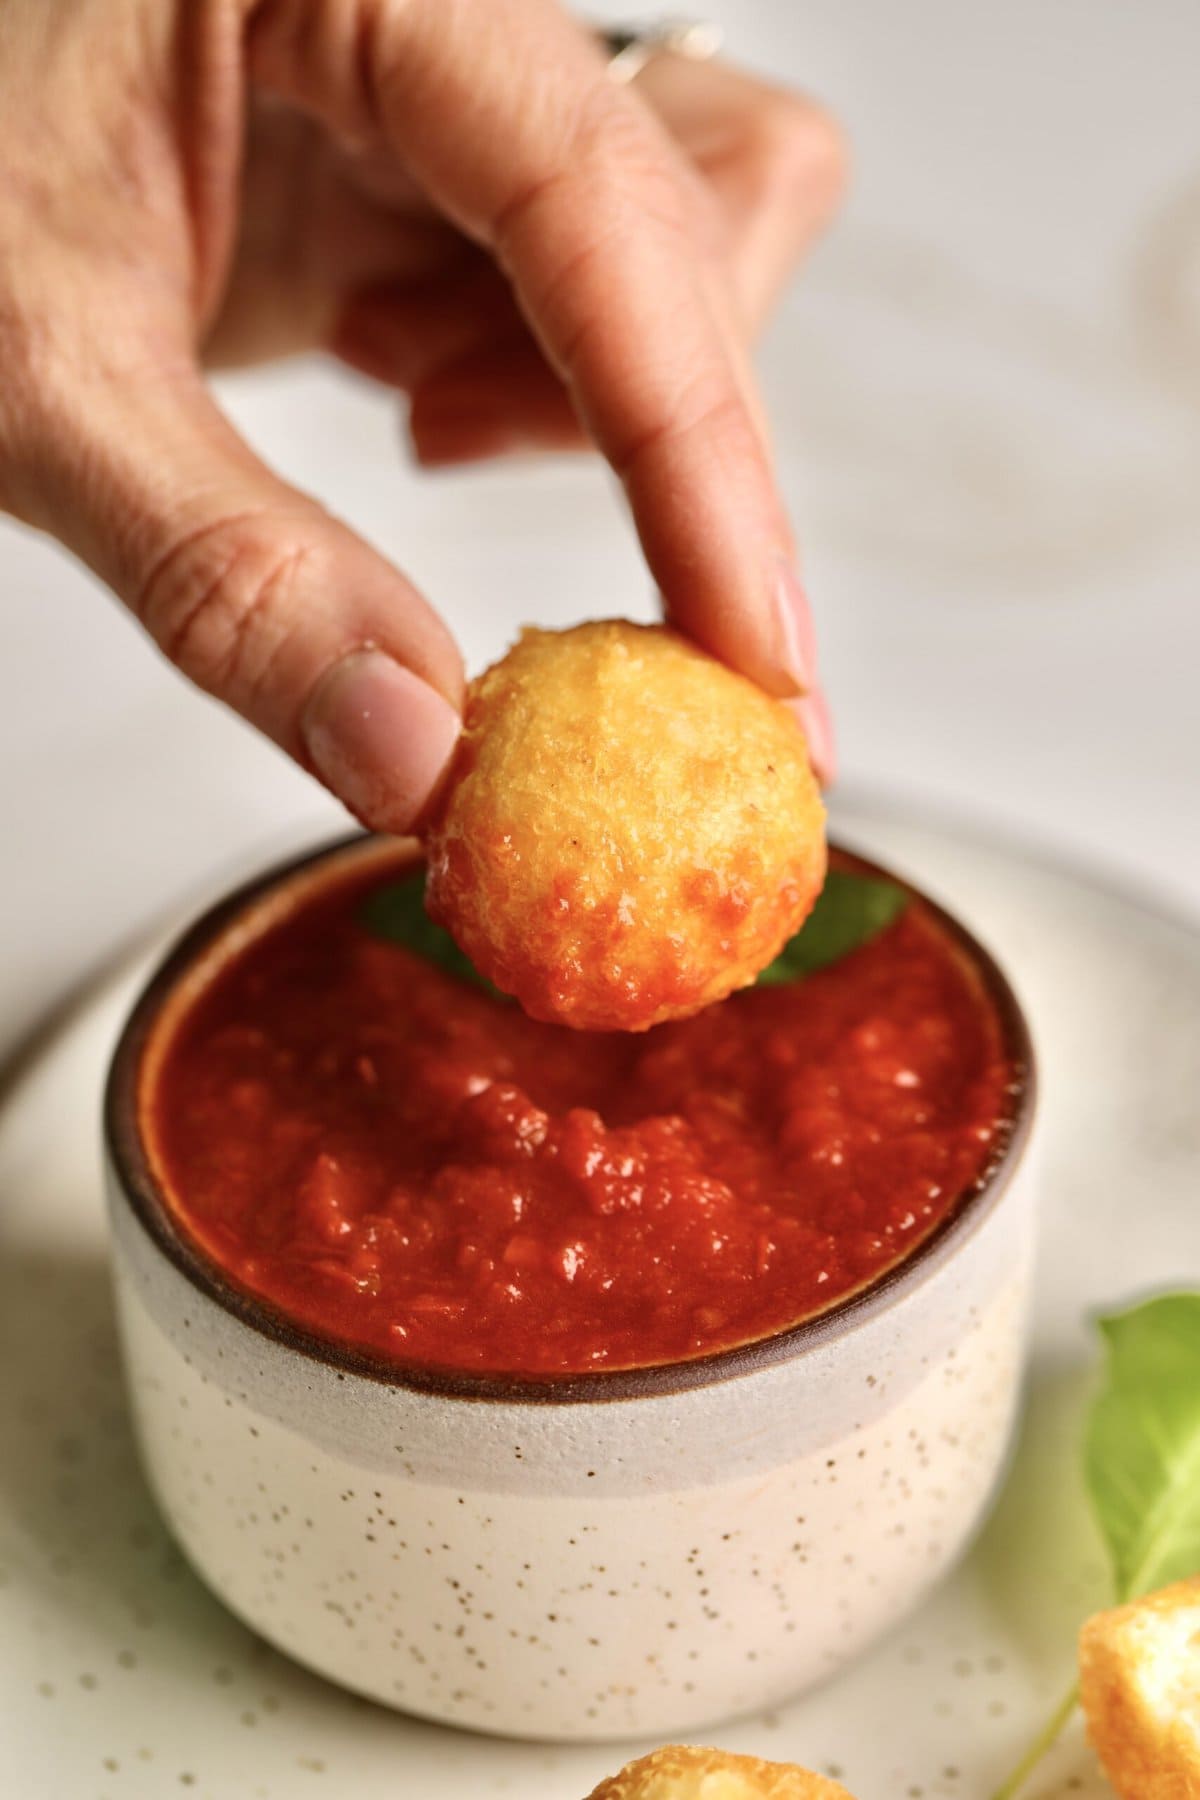 dipping the Easy Fried Cheese Balls Recipe (Crispy Bites) in the tomato dipping sauce.